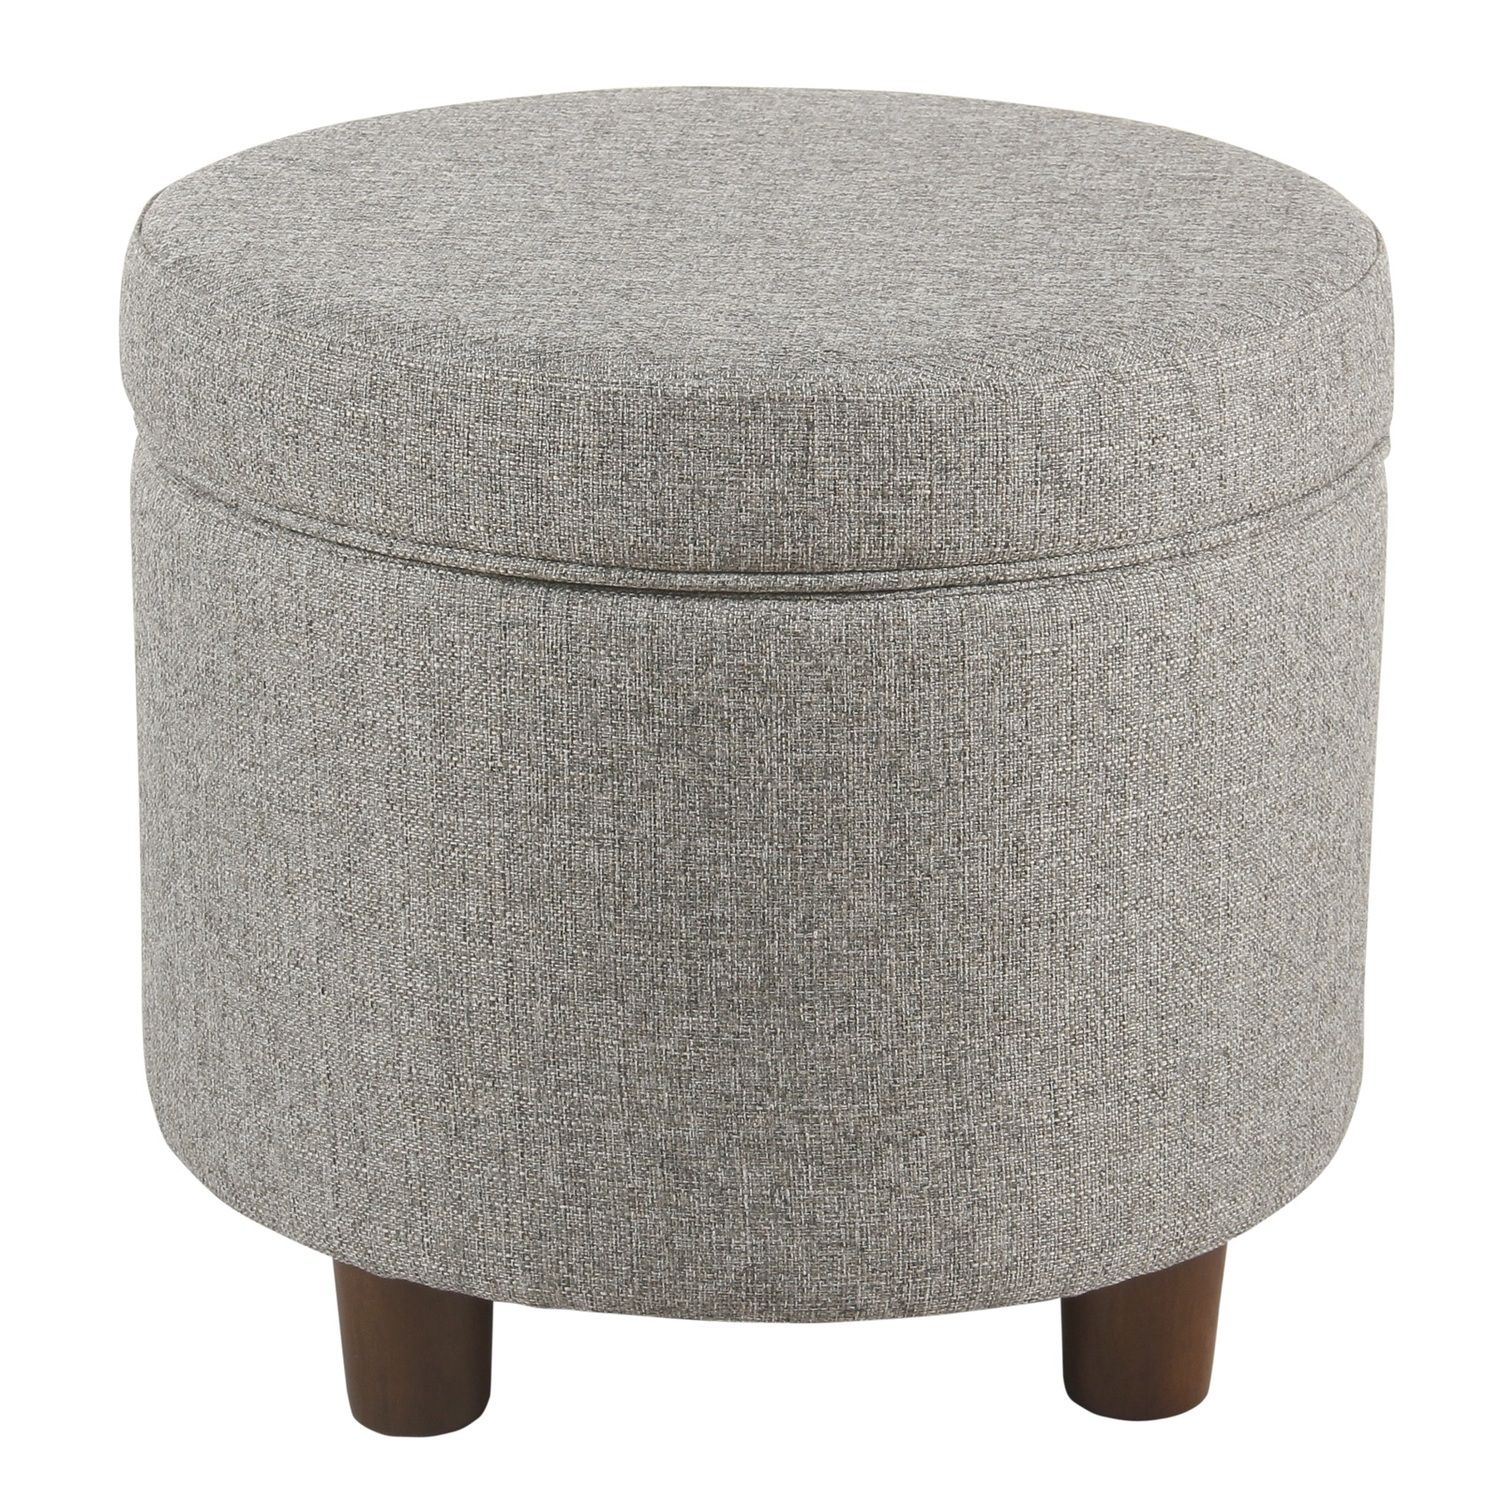 Benzara Fabric Upholstered Round Wooden Ottoman With Lift Off Lid Pertaining To Light Gray Fabric Tufted Round Storage Ottomans (View 7 of 20)